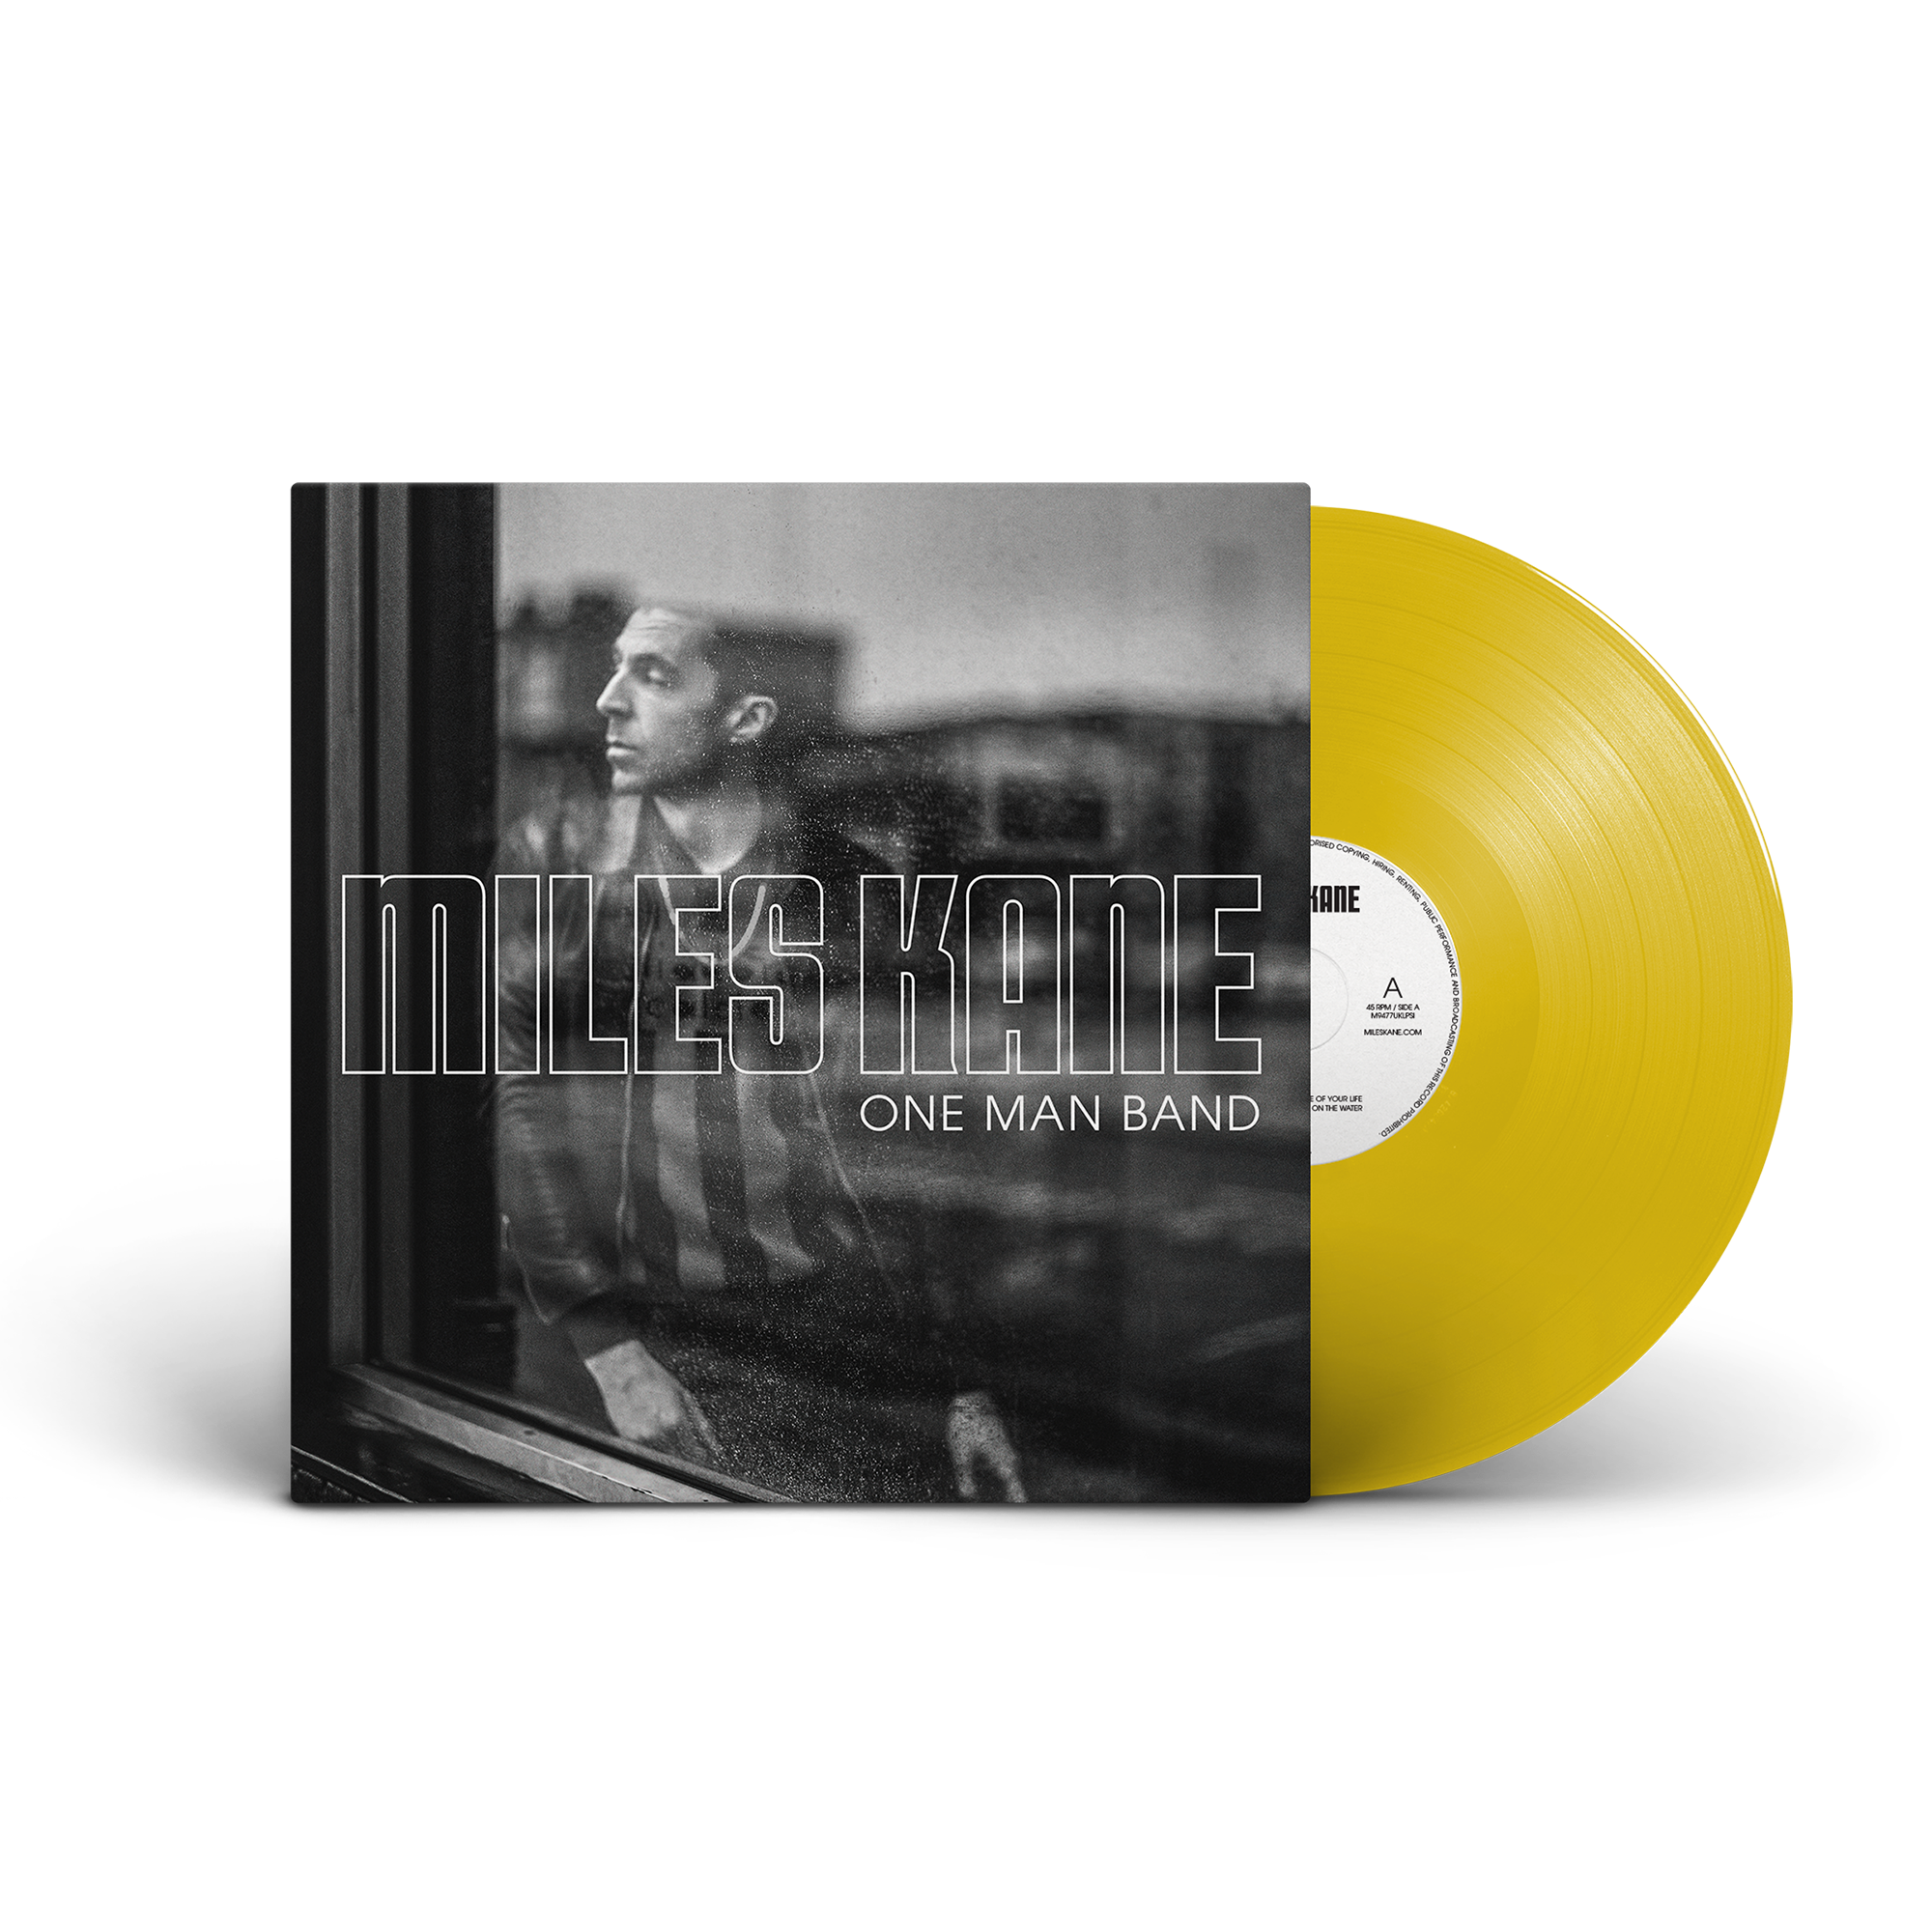 One Man Band: Limited Transparent Yellow Vinyl LP + Signed Print